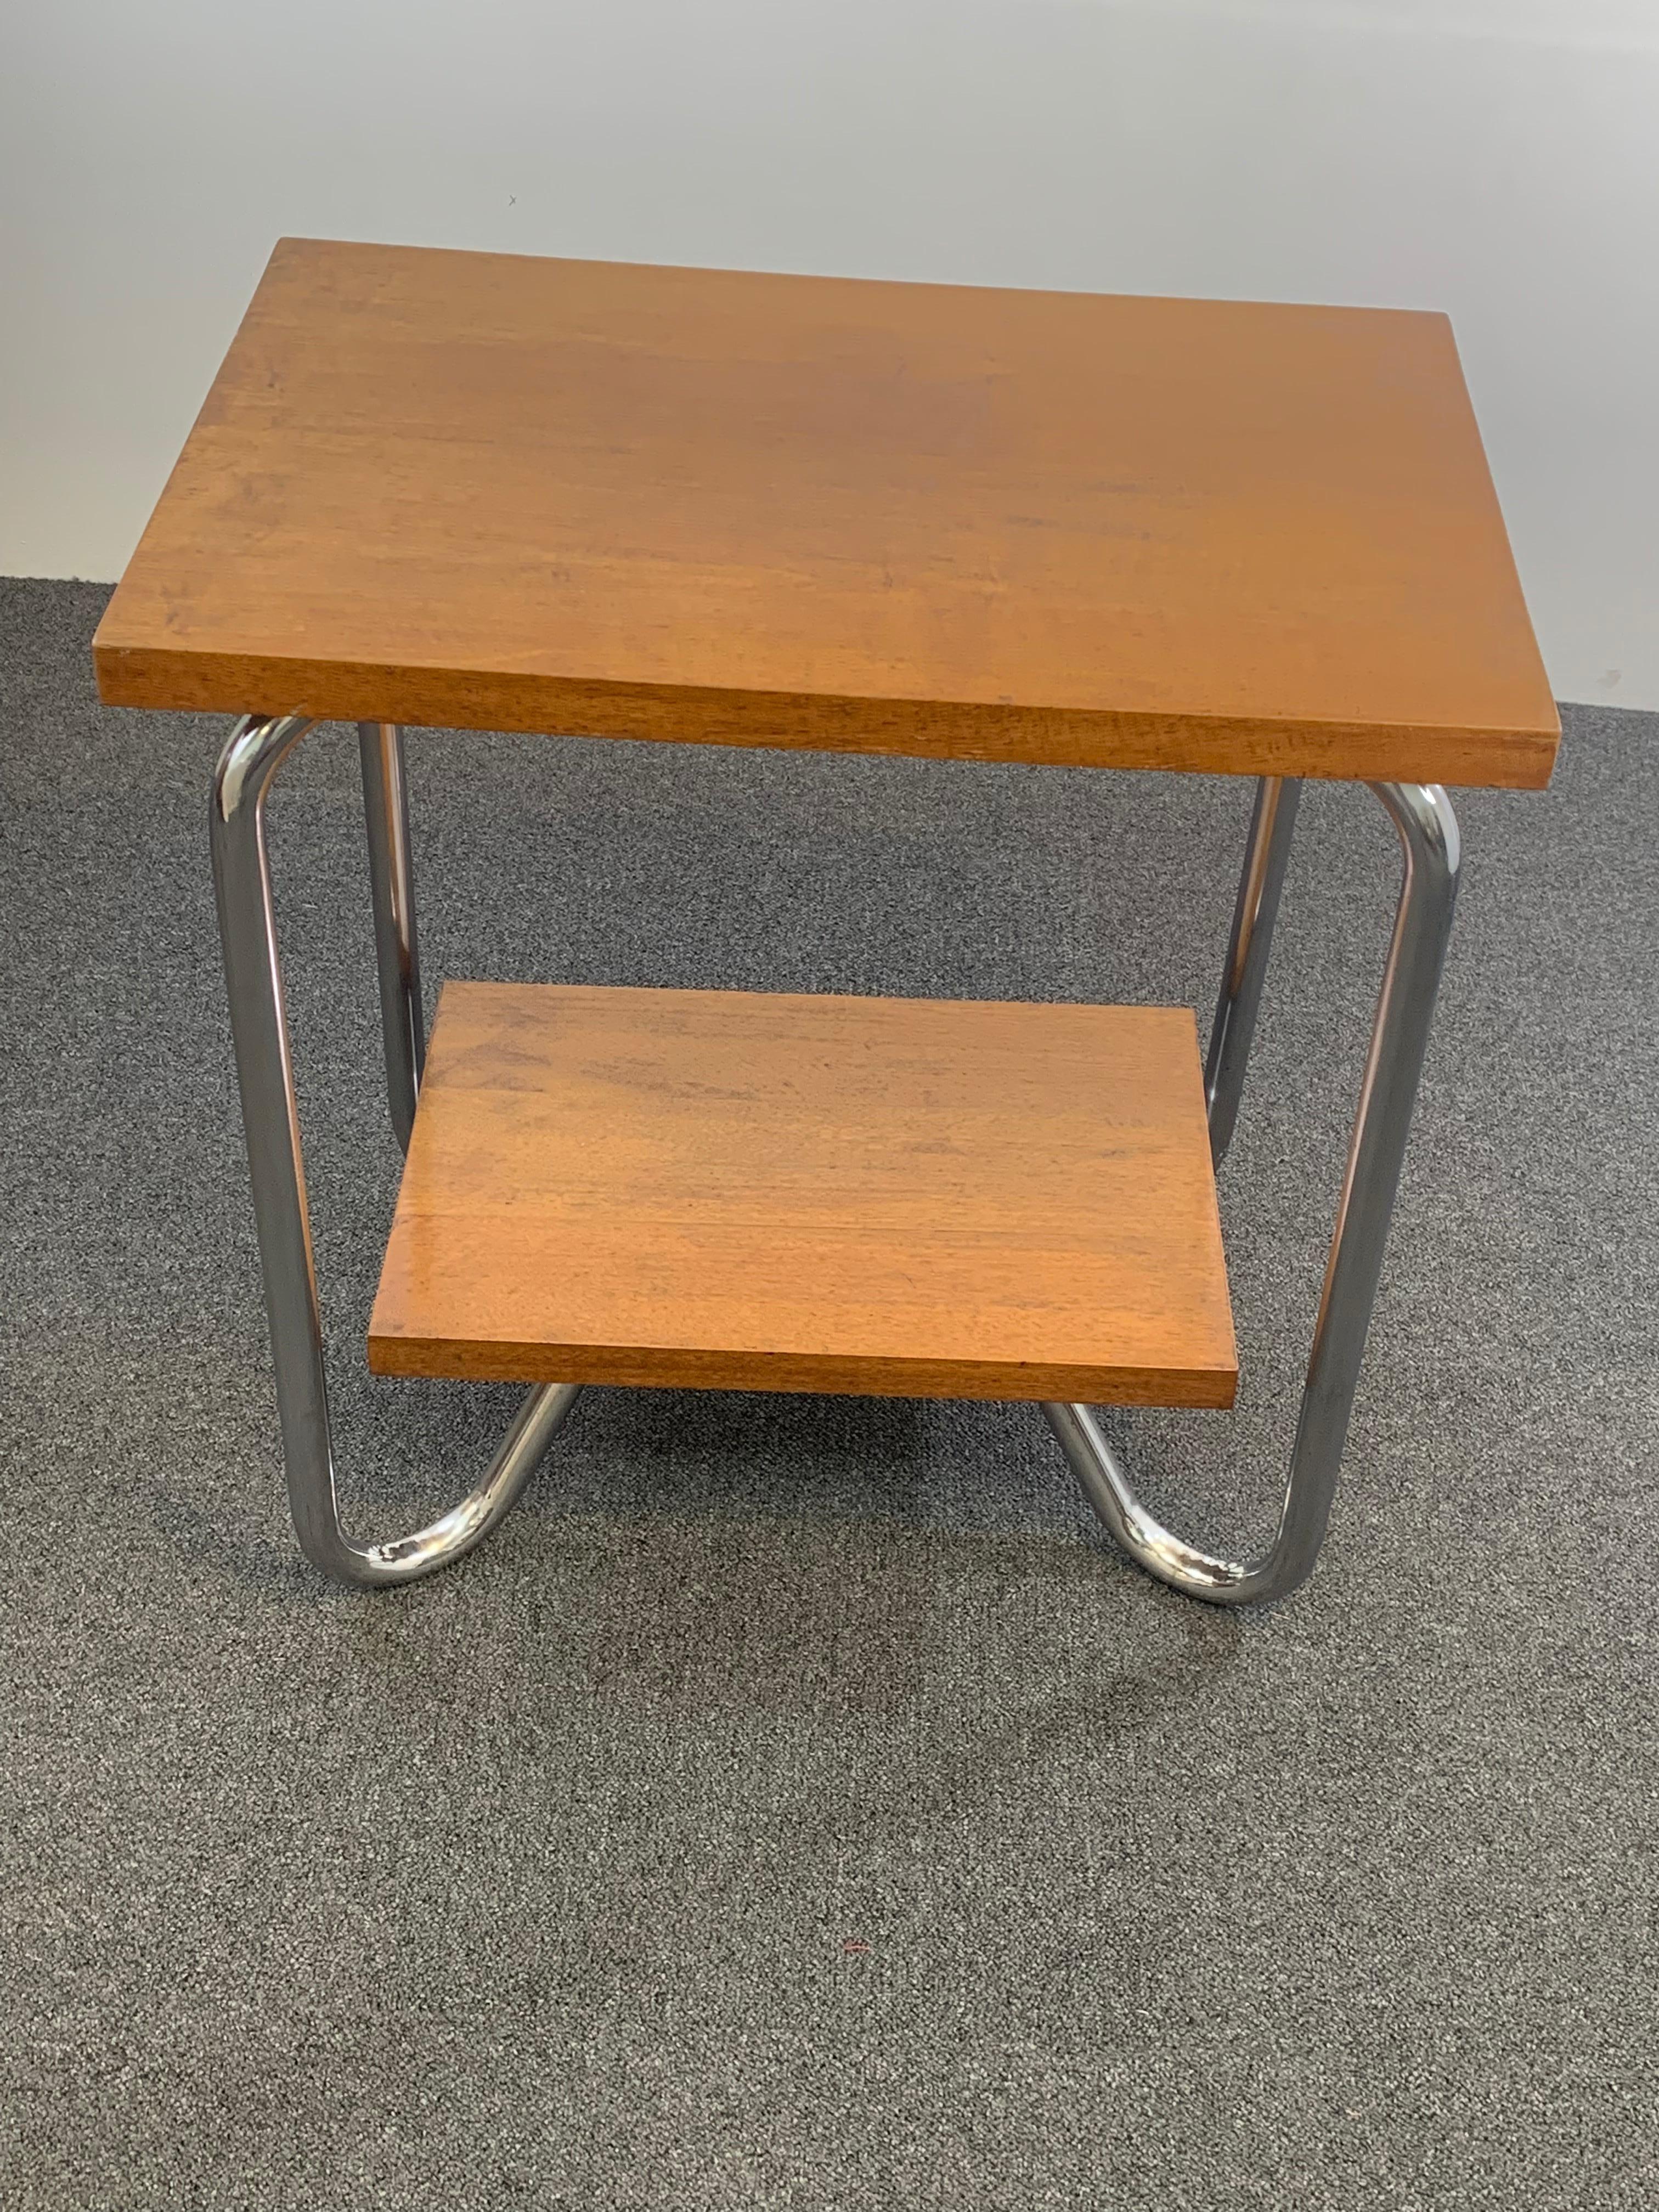 Belgium Art Deco Walnut and Chrome Tiered Side Table For Sale 5